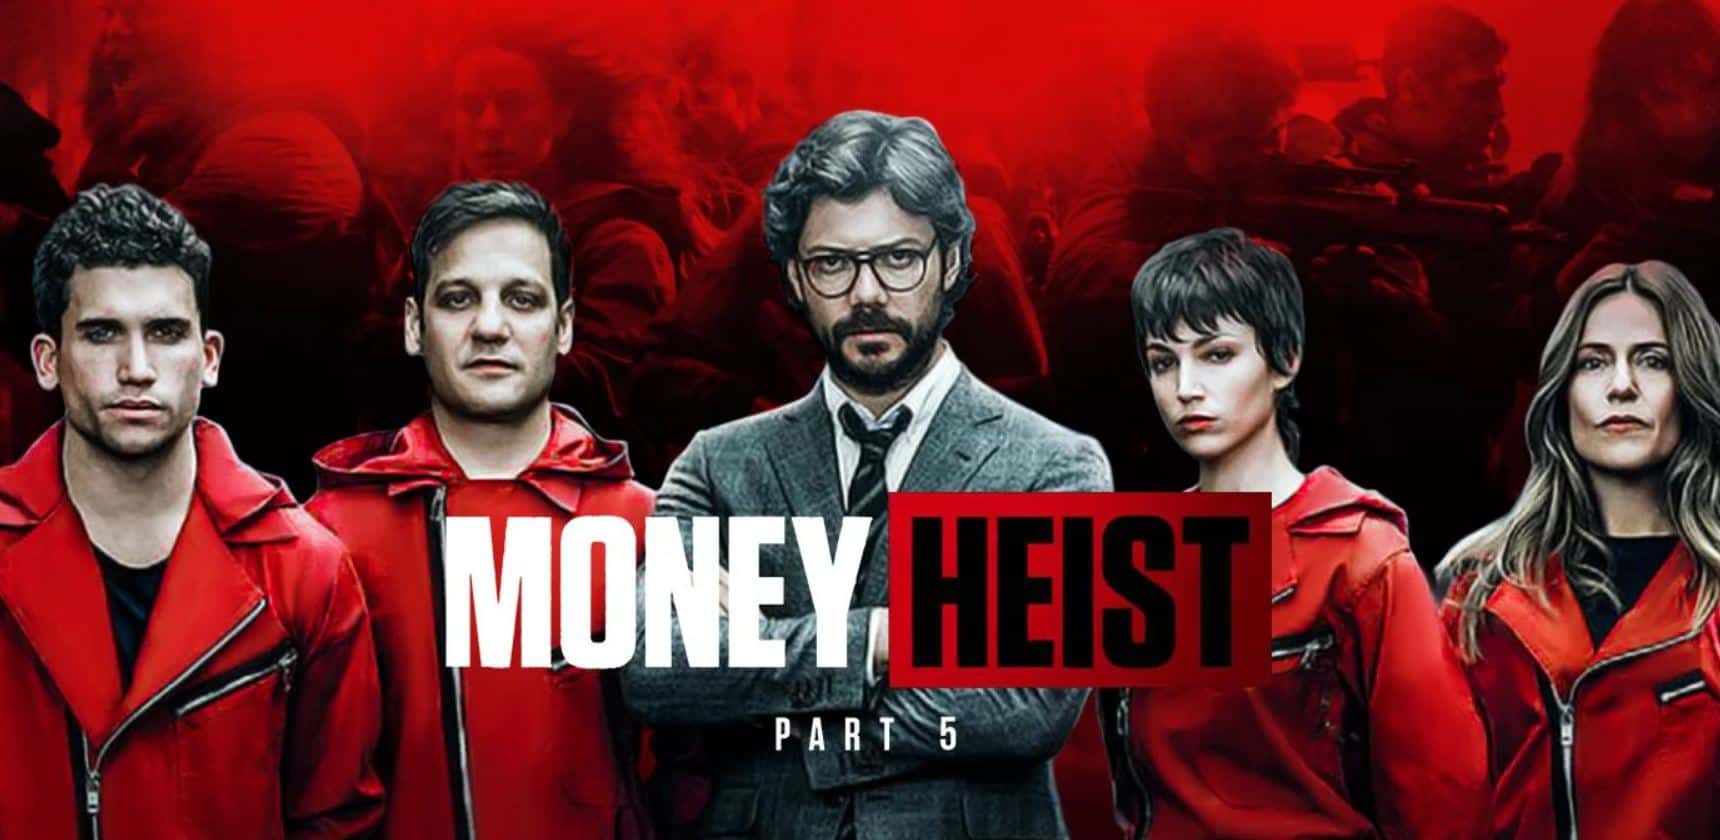 Money Heist Season 5 Part 1 Netflix Reveals The Episode Names From The New Season Prior To Its